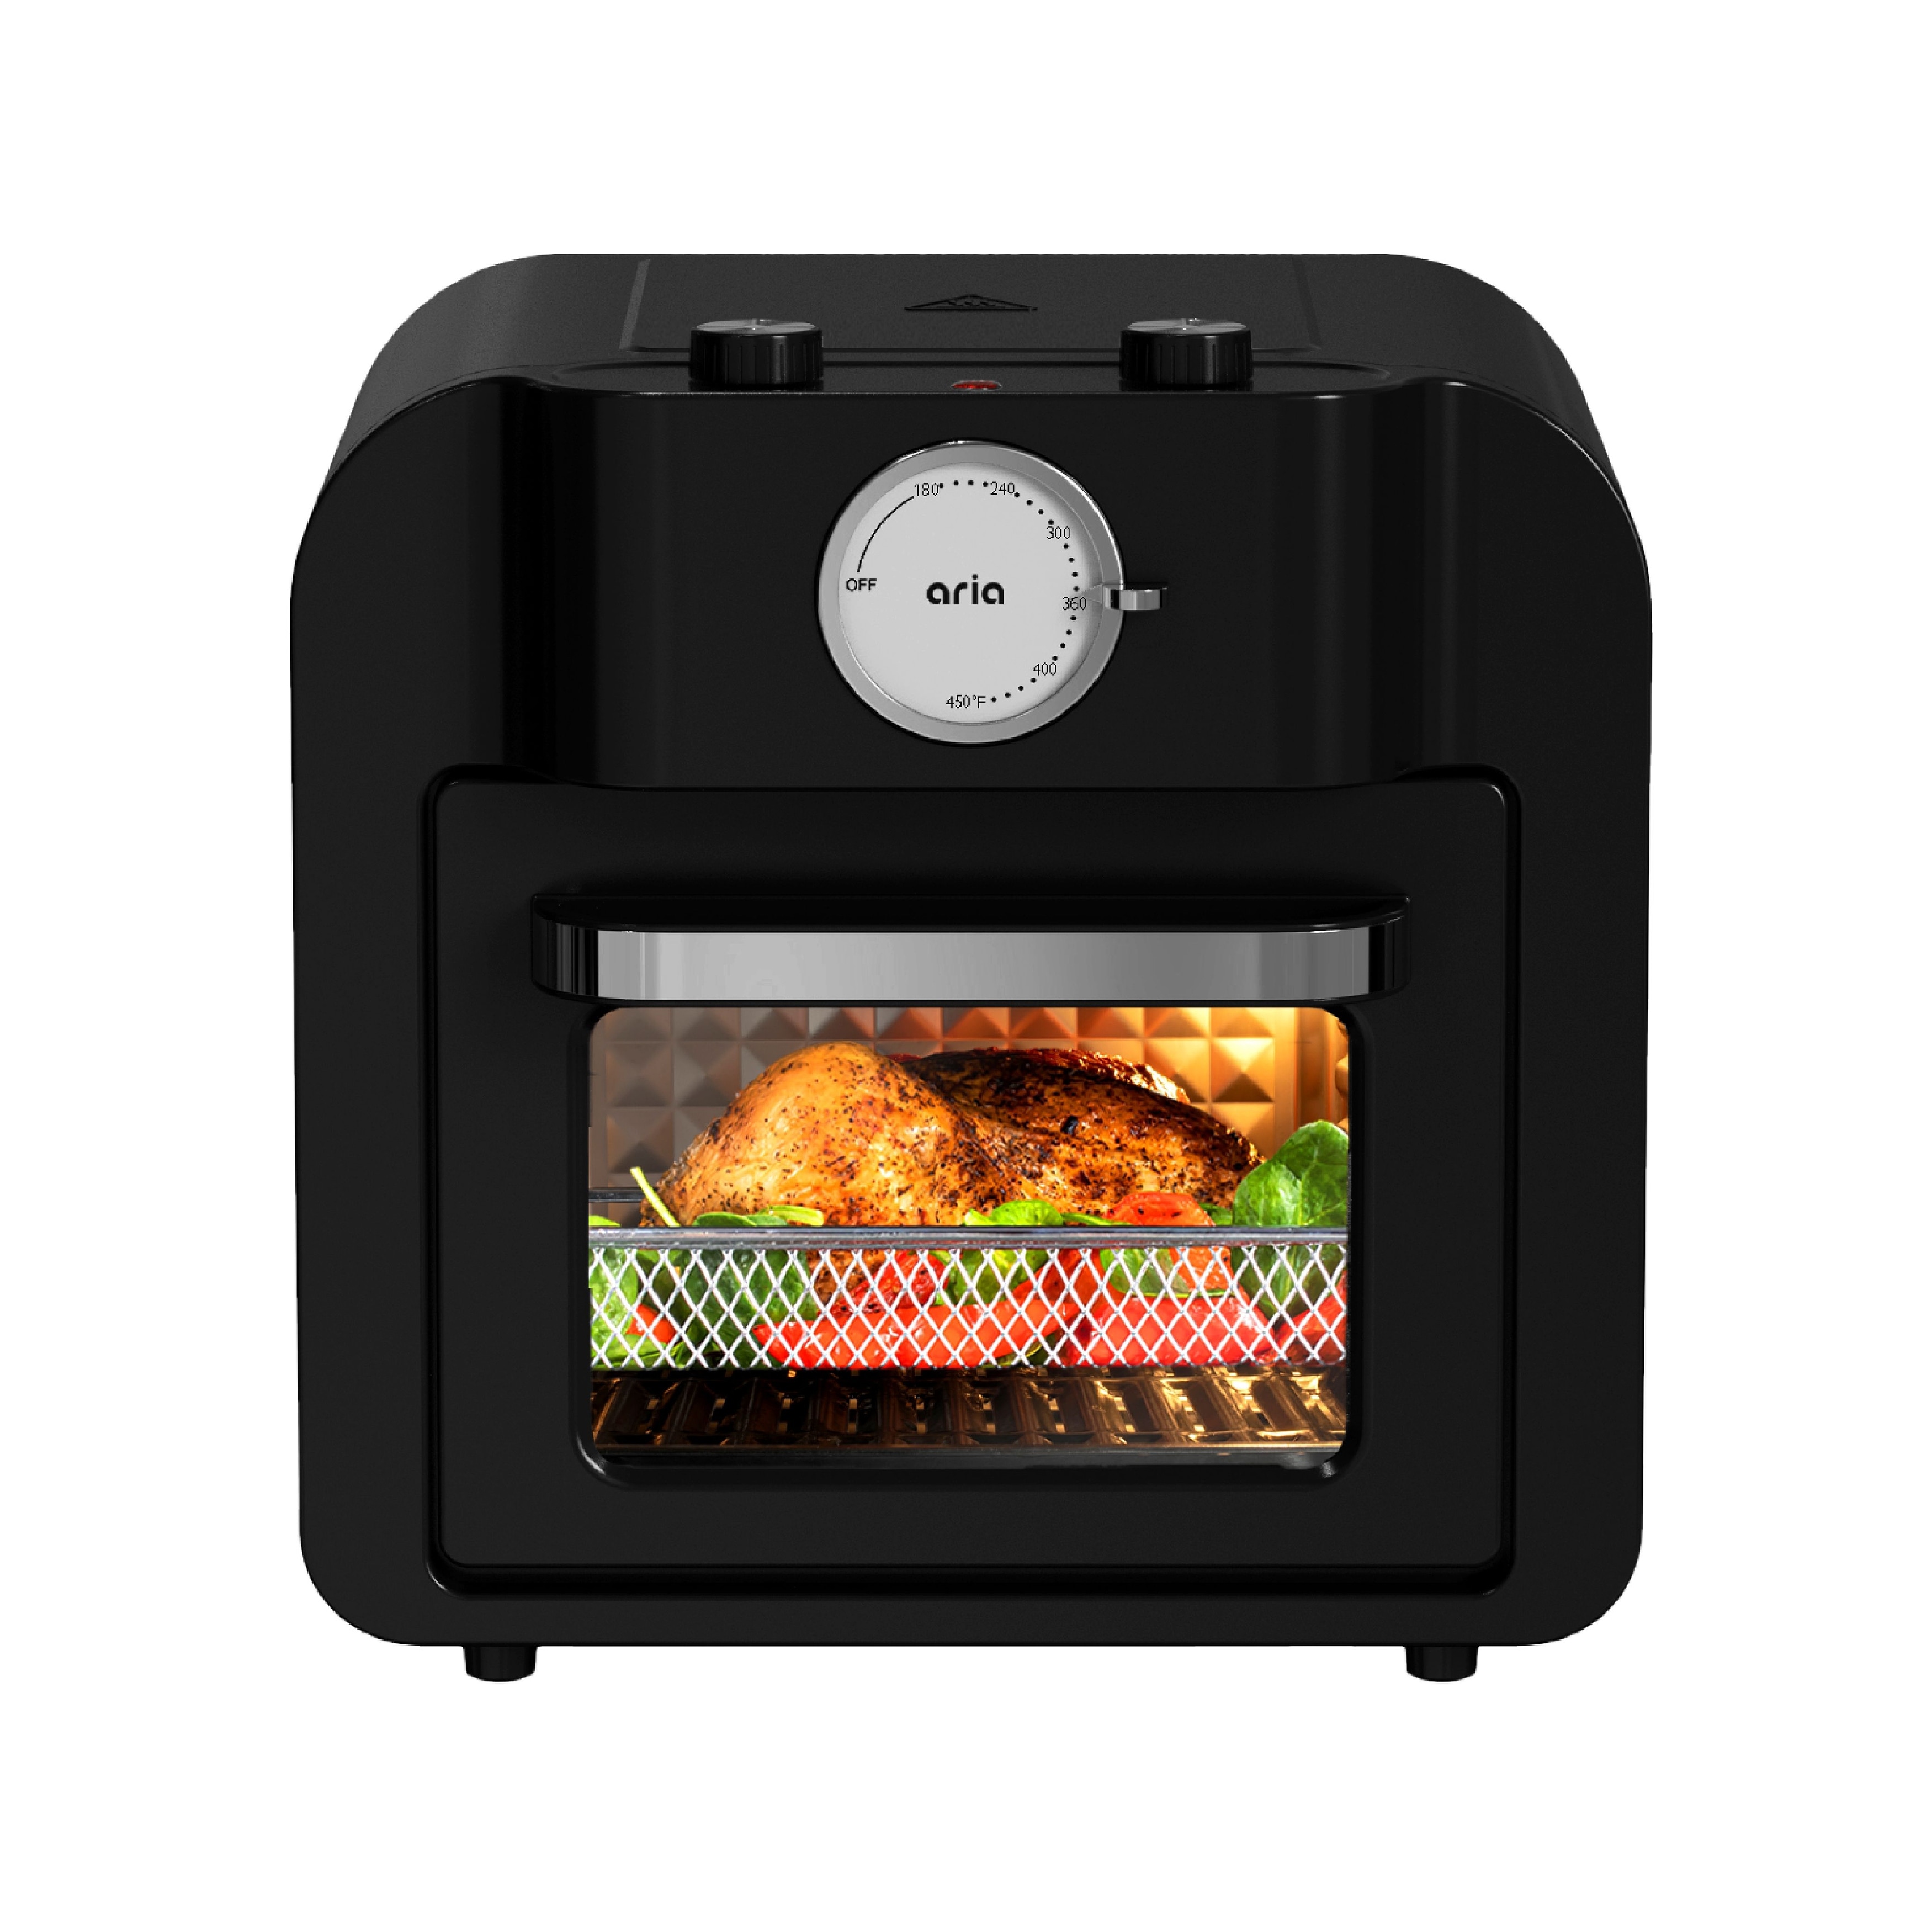 https://ak1.ostkcdn.com/images/products/is/images/direct/4b18fd42d2dea75854c75b8b7507b55408e46e92/Aria-16QT-Retro-Air-Fryer-Toaster-Oven.jpg